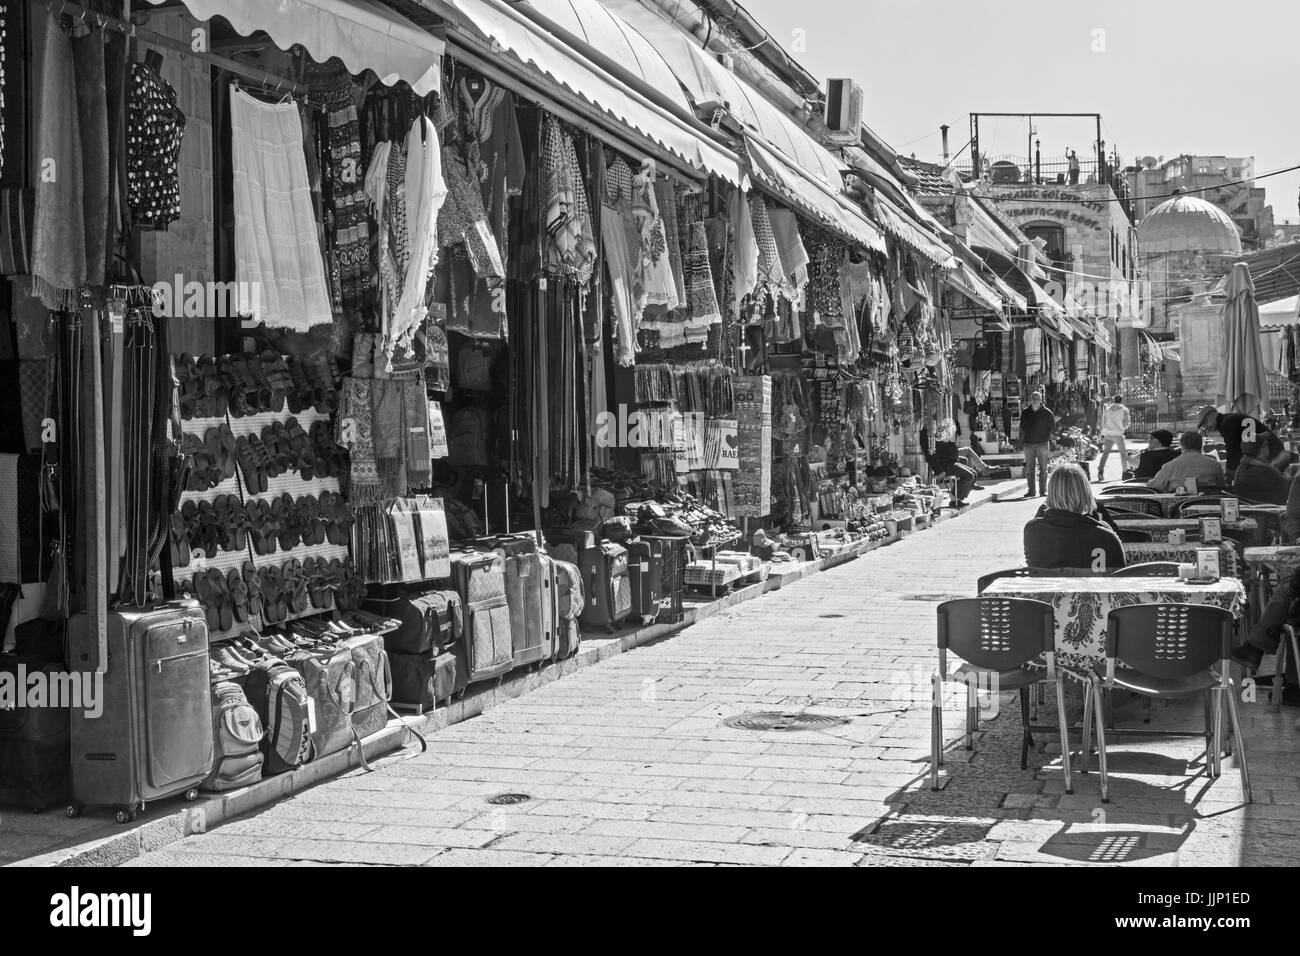 JERUSALEM, ISRAEL - MARCH 5, 2015: The market street in old town at full activity. Stock Photo